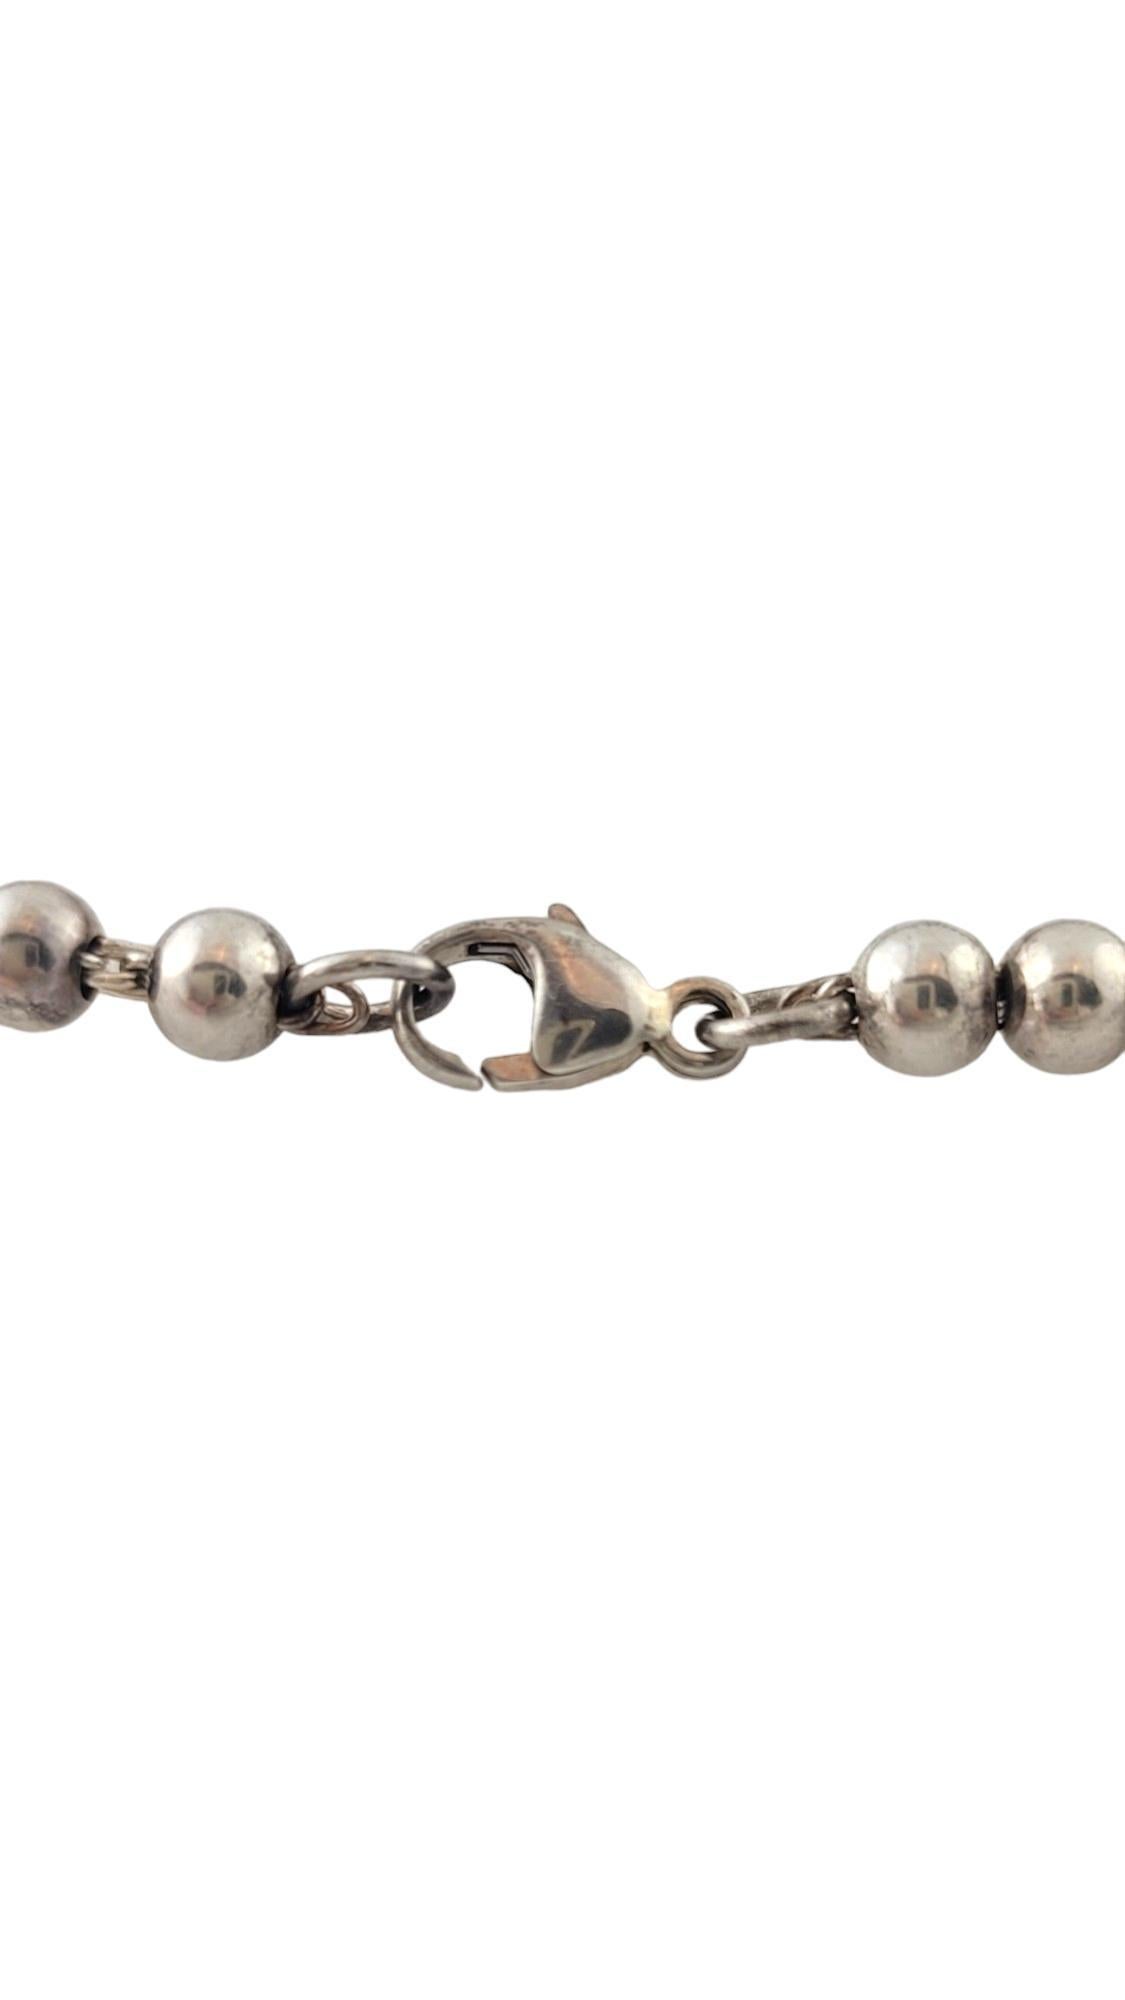 Tiffany & Co. Sterling Silver Return to Tiffany Heart Tag Bead Bracelet #17391 For Sale 1